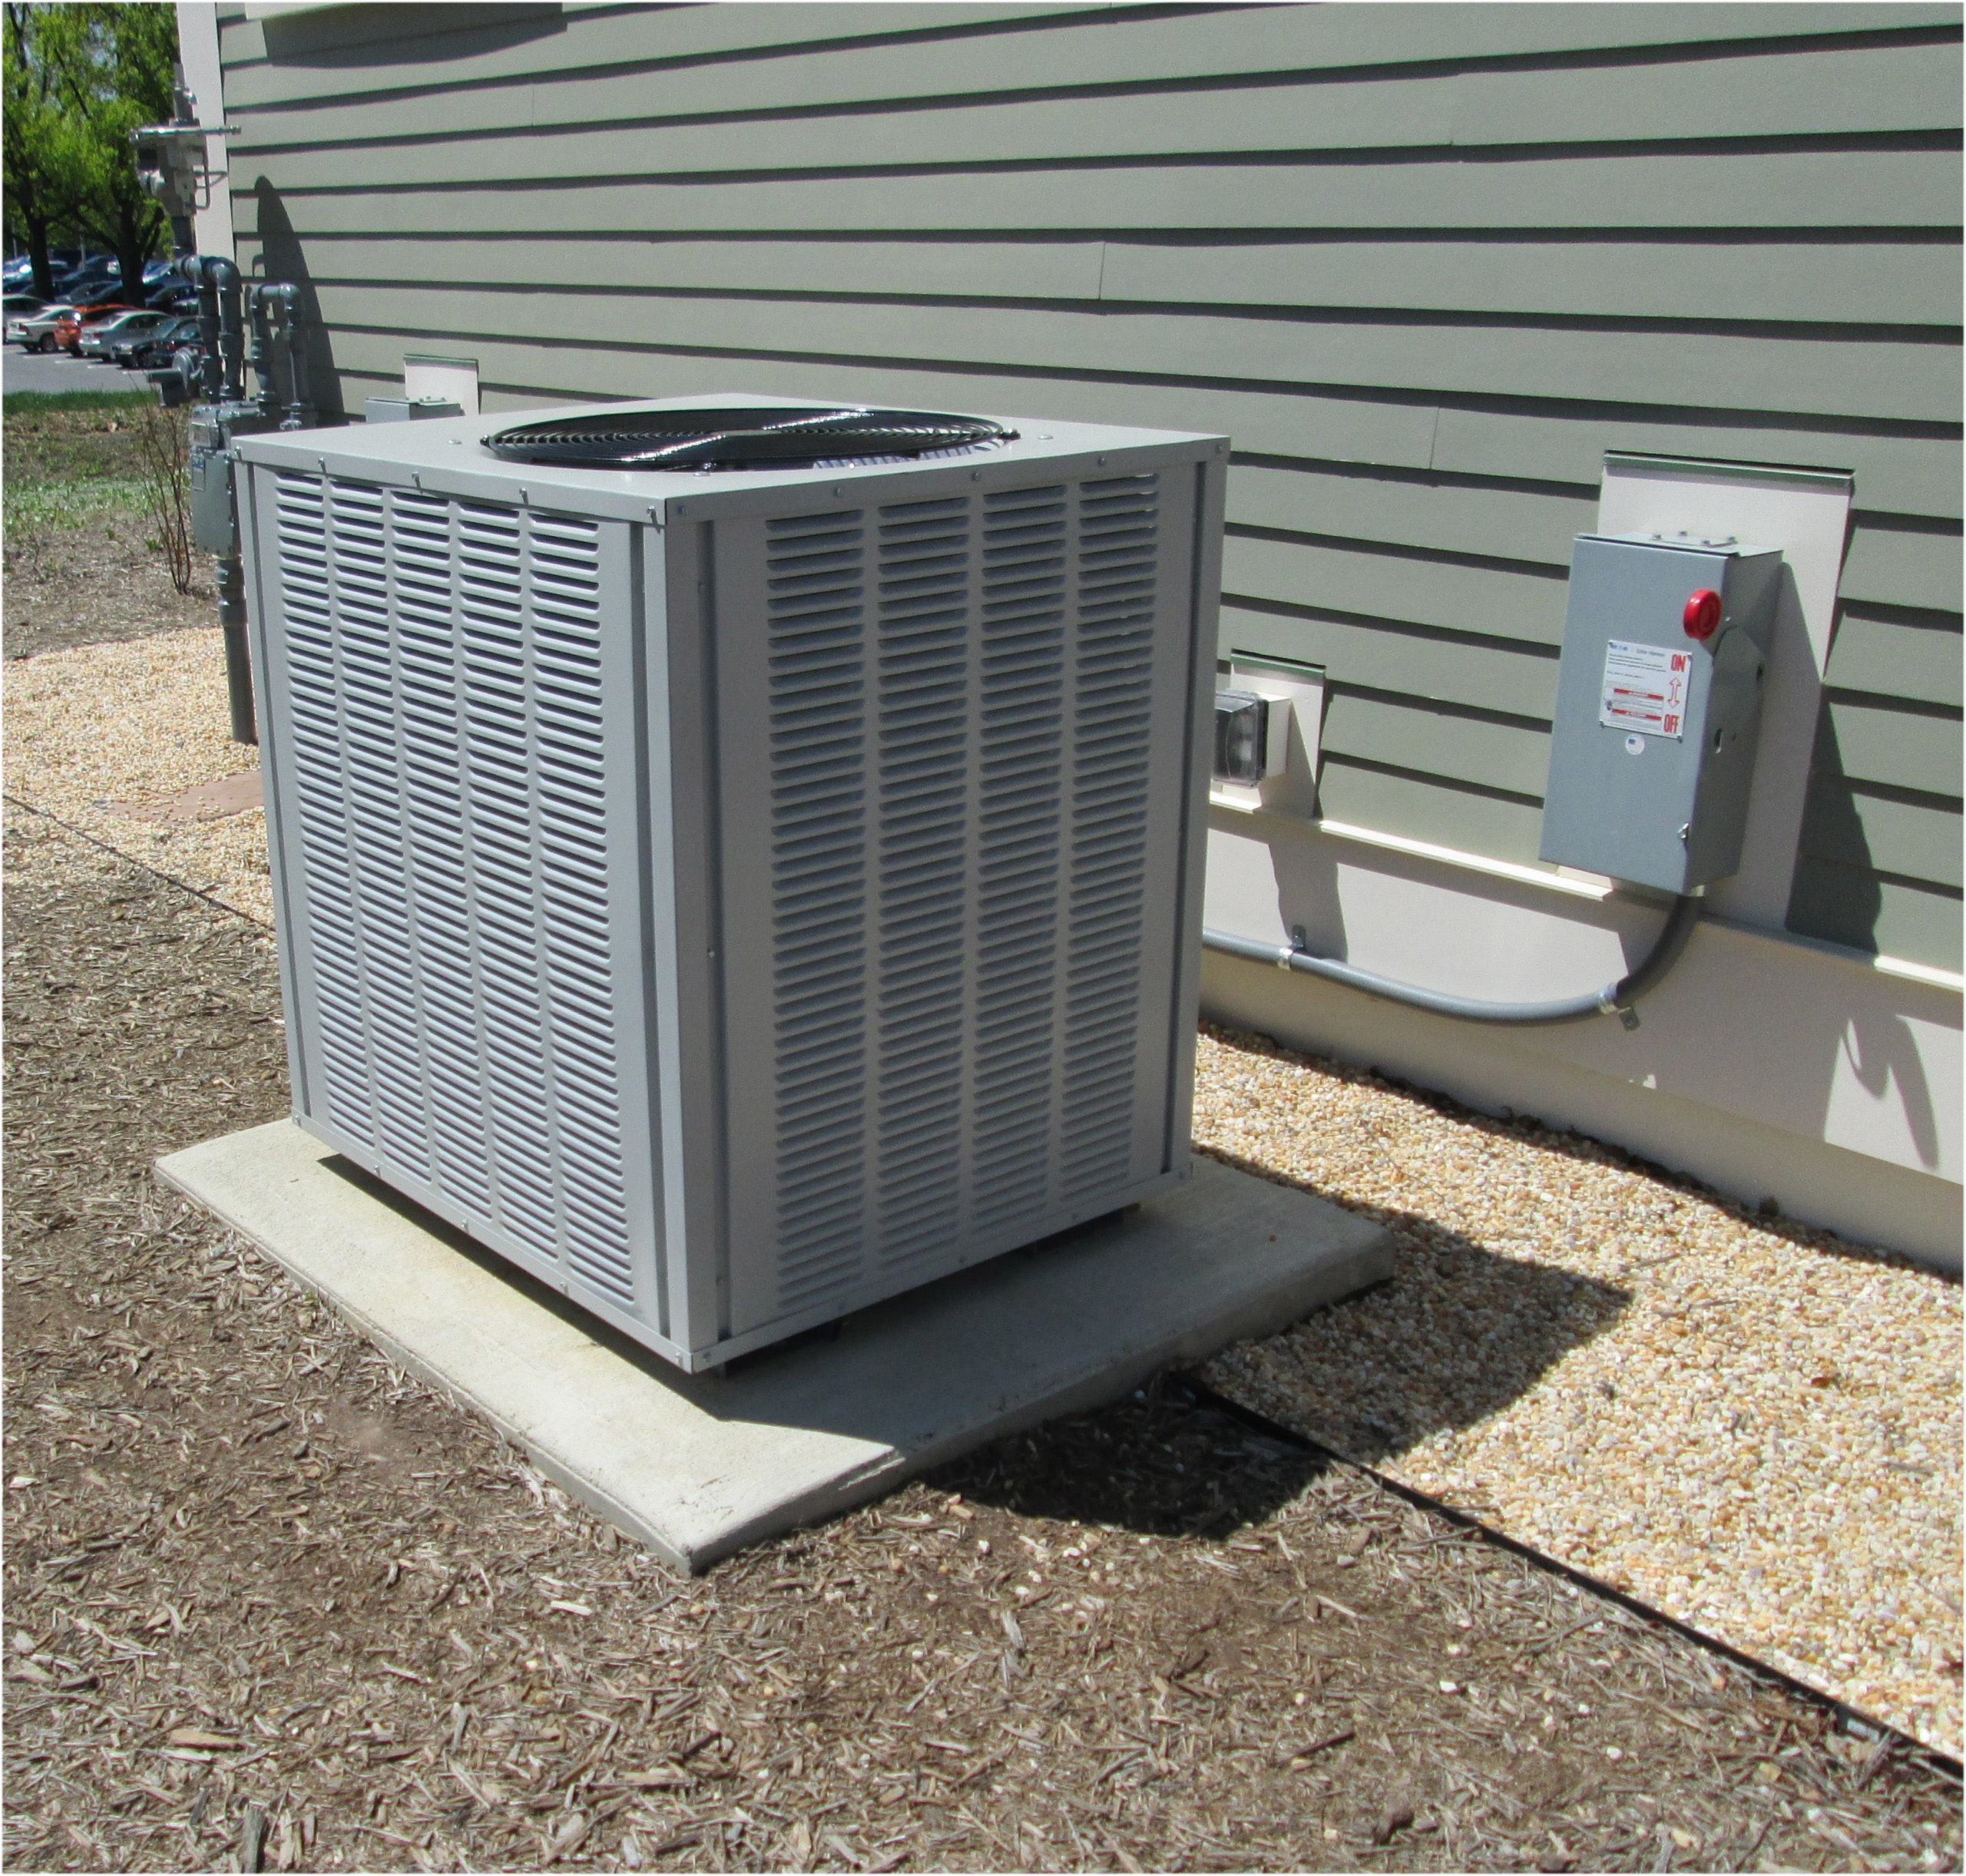 Pin on Heat and Ventilation ( Air Cons /Refrigeration)